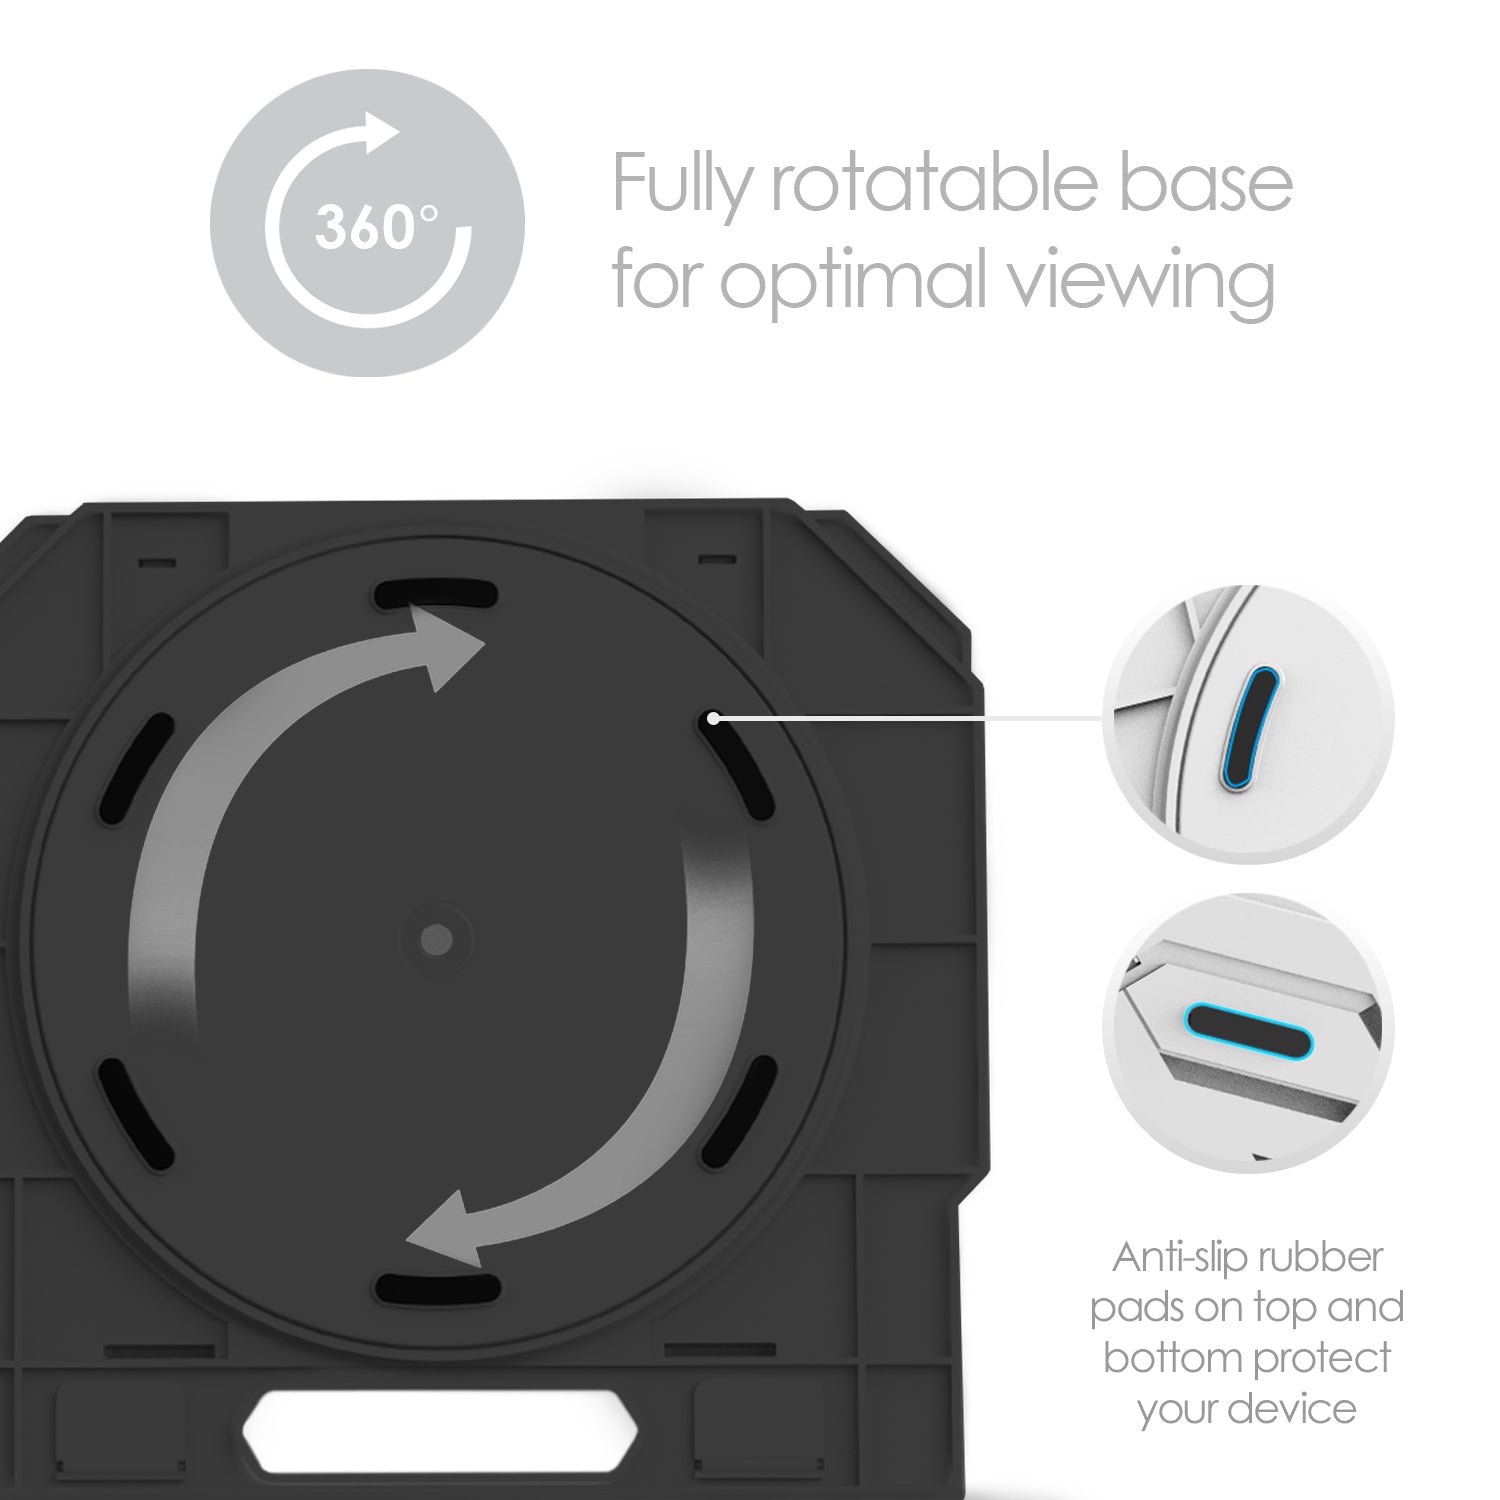 Bottom of laptop stand shown to show how the 360 degree rotation is achieved using a carousel configuration with anti-slip rubber pads. Text reads "fully rotatable base for optimal viewing" and "Anti sliip rubber pads on top and bottom protect your device "